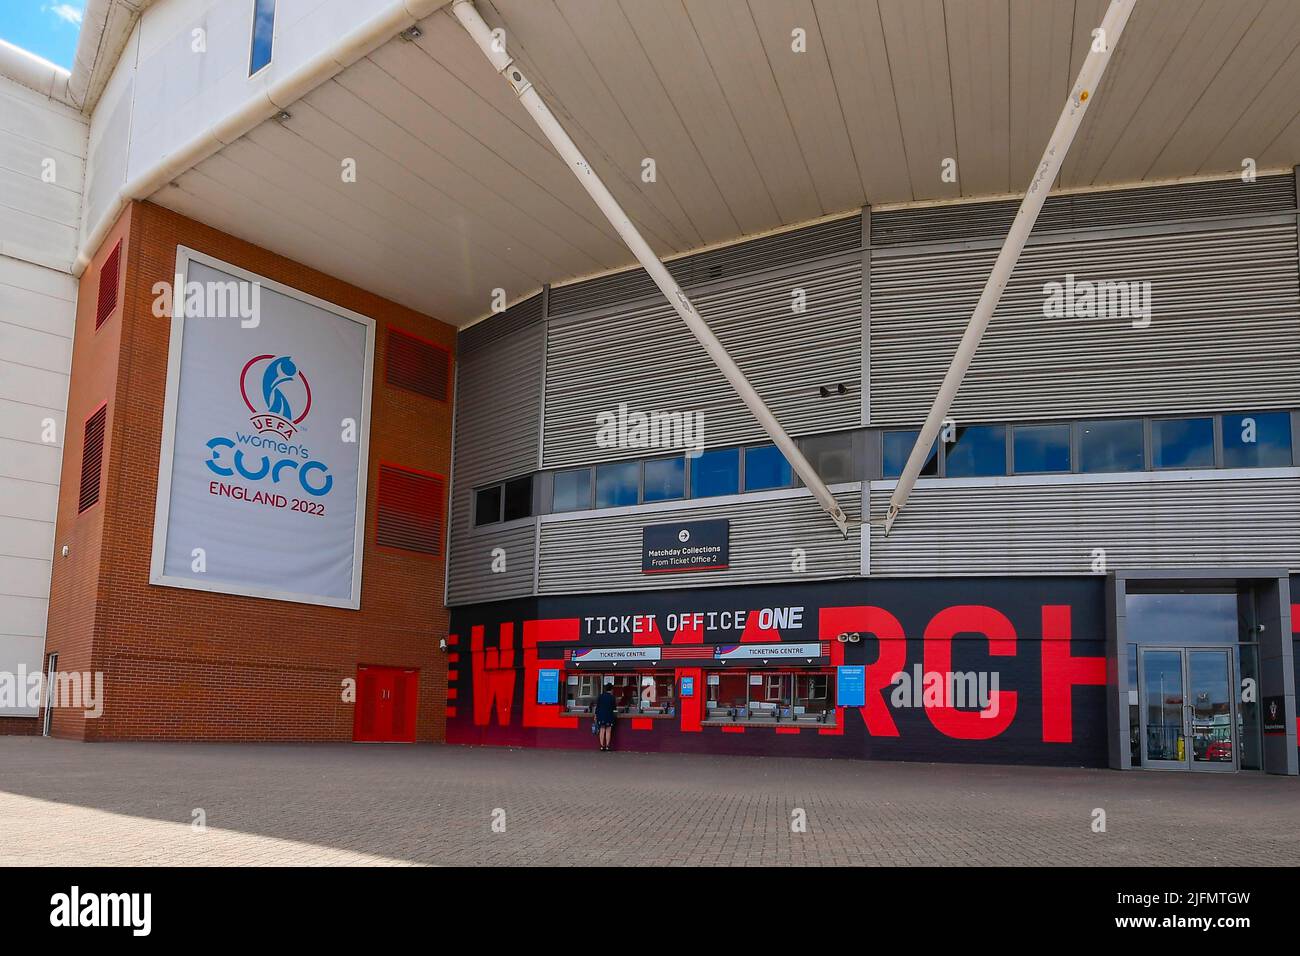 Southampton, Hampshire, UK.  4th July 2022. General view outside St Mary’s Stadium, home of Southampton Football Club which is hosting three UEFA Women’s Euro 2022 group matches starting on Thursday 7th July with Norway v Northern Ireland.  View of the ticket office. Picture Credit: Graham Hunt/Alamy Live News Stock Photo